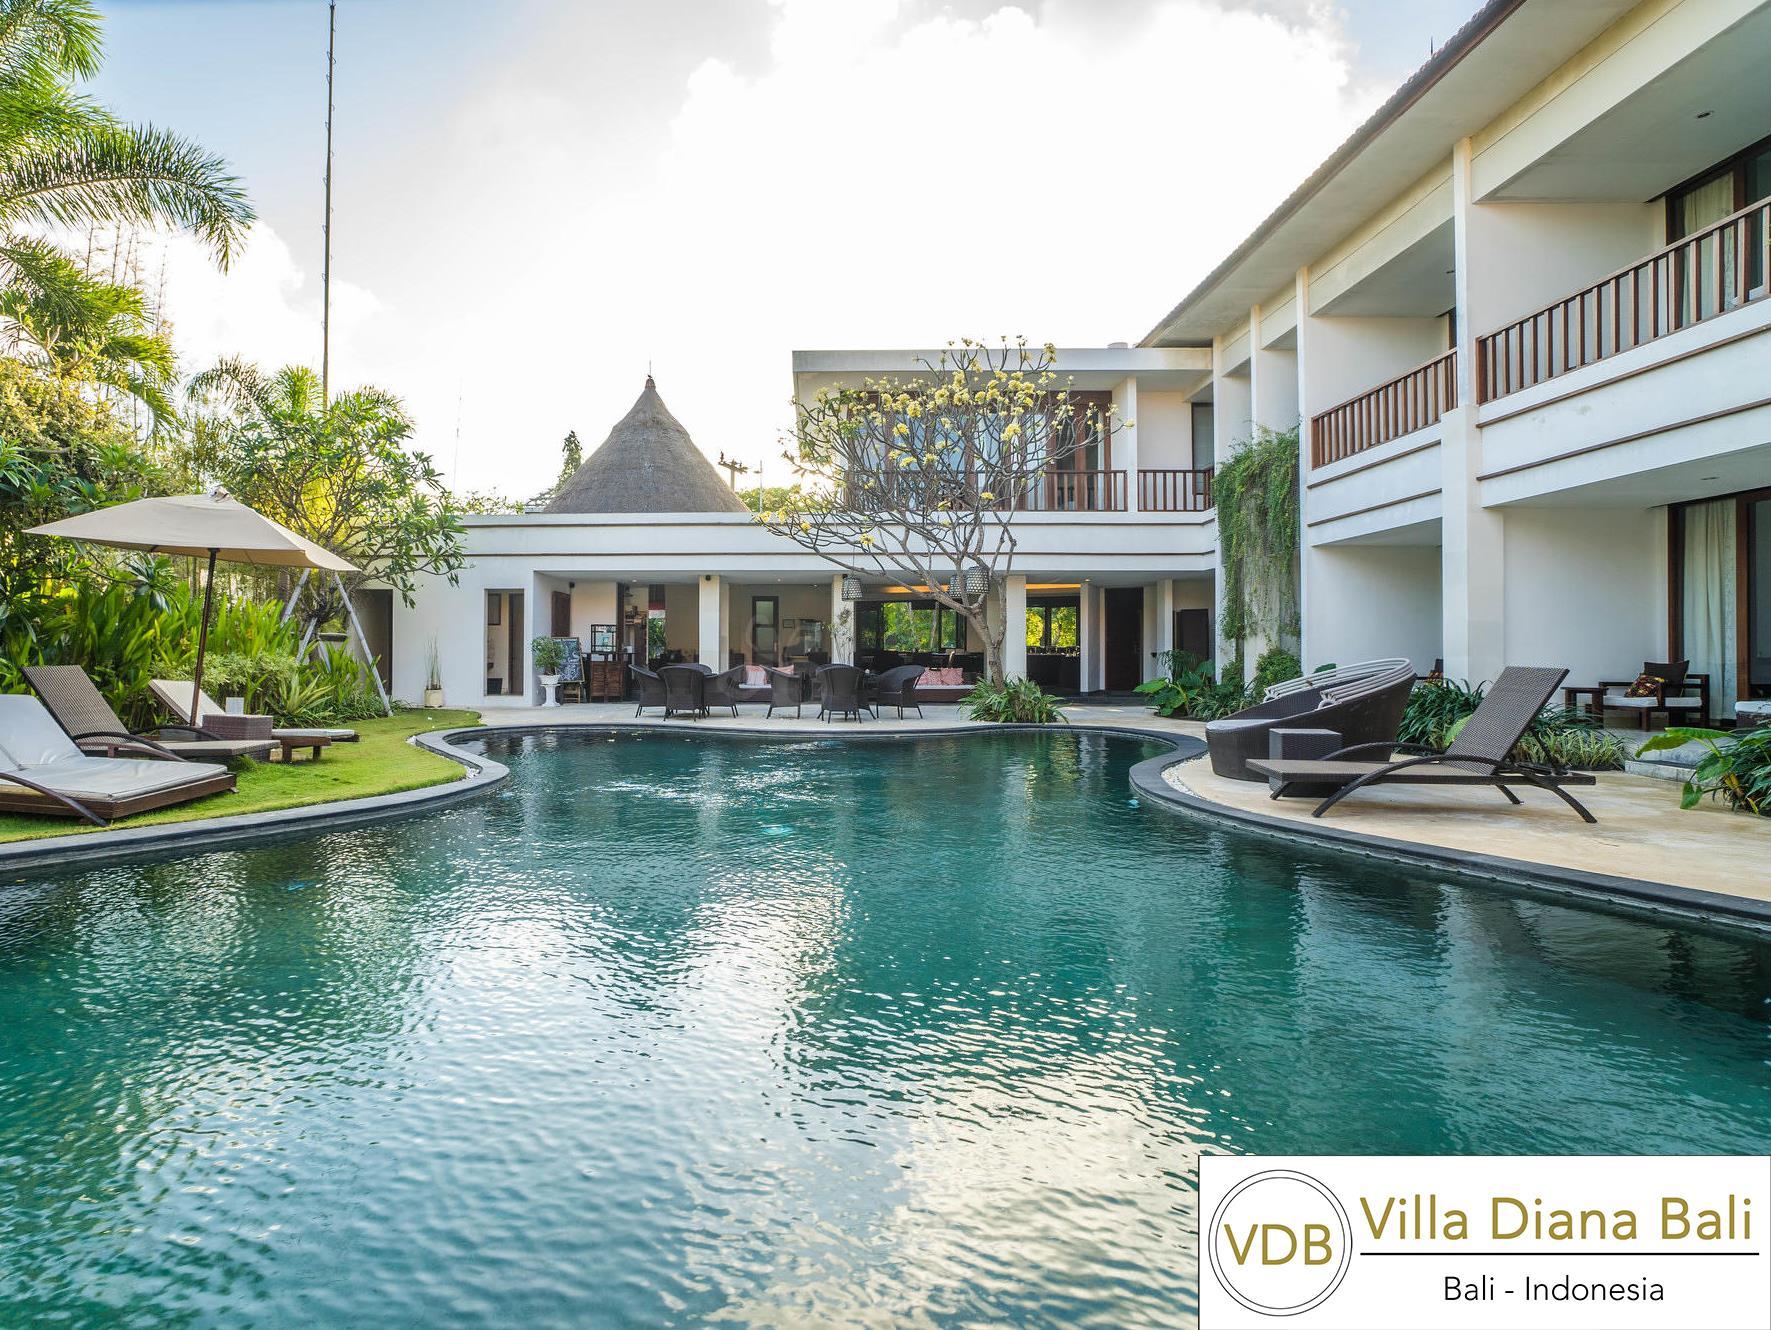 Villa Diana Bali Hotel Bali District FAQ 2016, What facilities are there in Villa Diana Bali Hotel Bali District 2016, What Languages Spoken are Supported in Villa Diana Bali Hotel Bali District 2016, Which payment cards are accepted in Villa Diana Bali Hotel Bali District , Bali District Villa Diana Bali Hotel room facilities and services Q&A 2016, Bali District Villa Diana Bali Hotel online booking services 2016, Bali District Villa Diana Bali Hotel address 2016, Bali District Villa Diana Bali Hotel telephone number 2016,Bali District Villa Diana Bali Hotel map 2016, Bali District Villa Diana Bali Hotel traffic guide 2016, how to go Bali District Villa Diana Bali Hotel, Bali District Villa Diana Bali Hotel booking online 2016, Bali District Villa Diana Bali Hotel room types 2016.